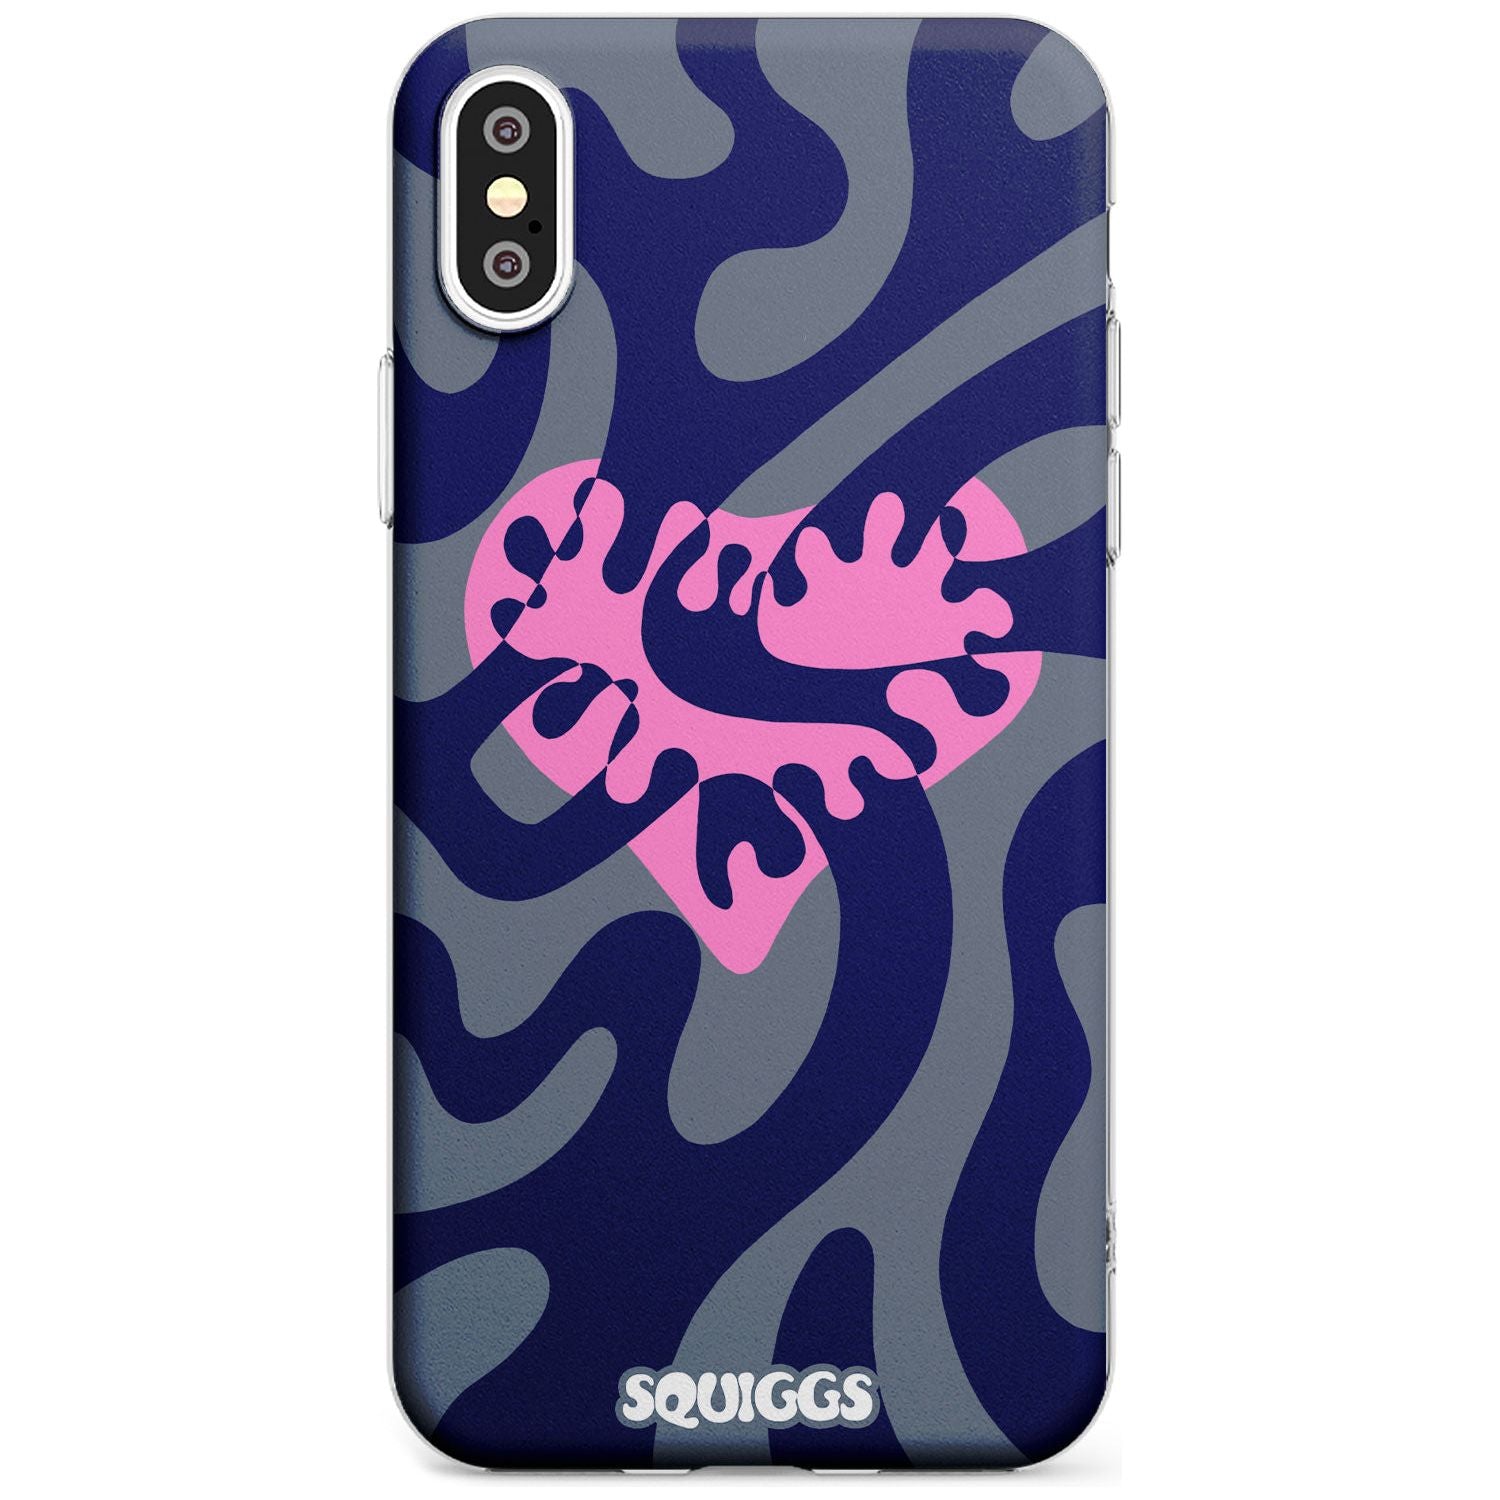 Broken Heart Black Impact Phone Case for iPhone X XS Max XR